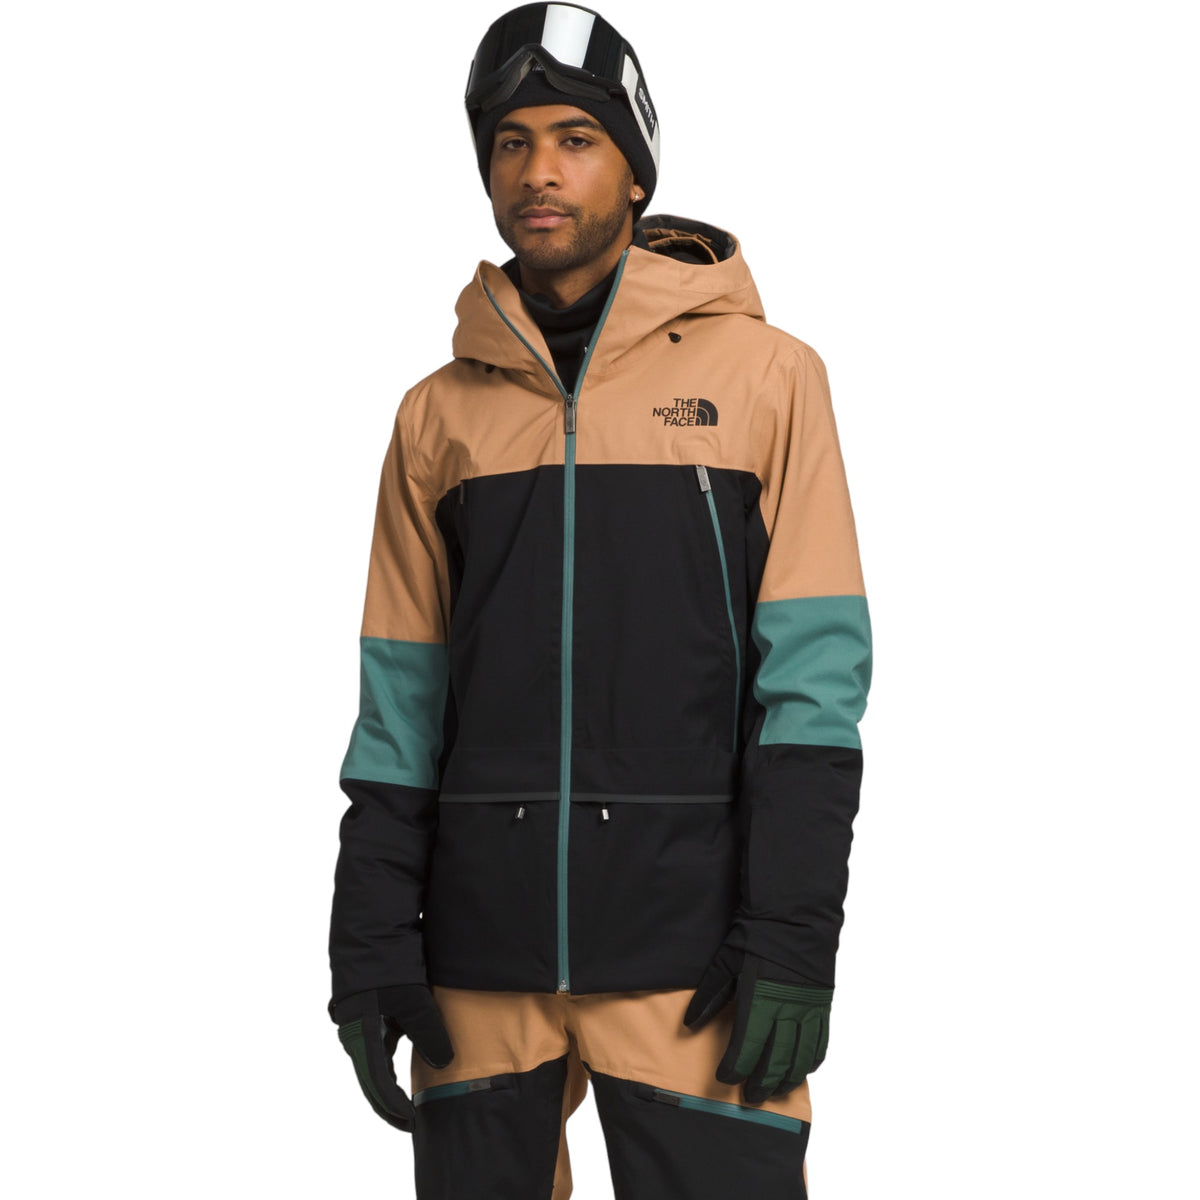 The North Face Manteau Zarre Homme – Oberson